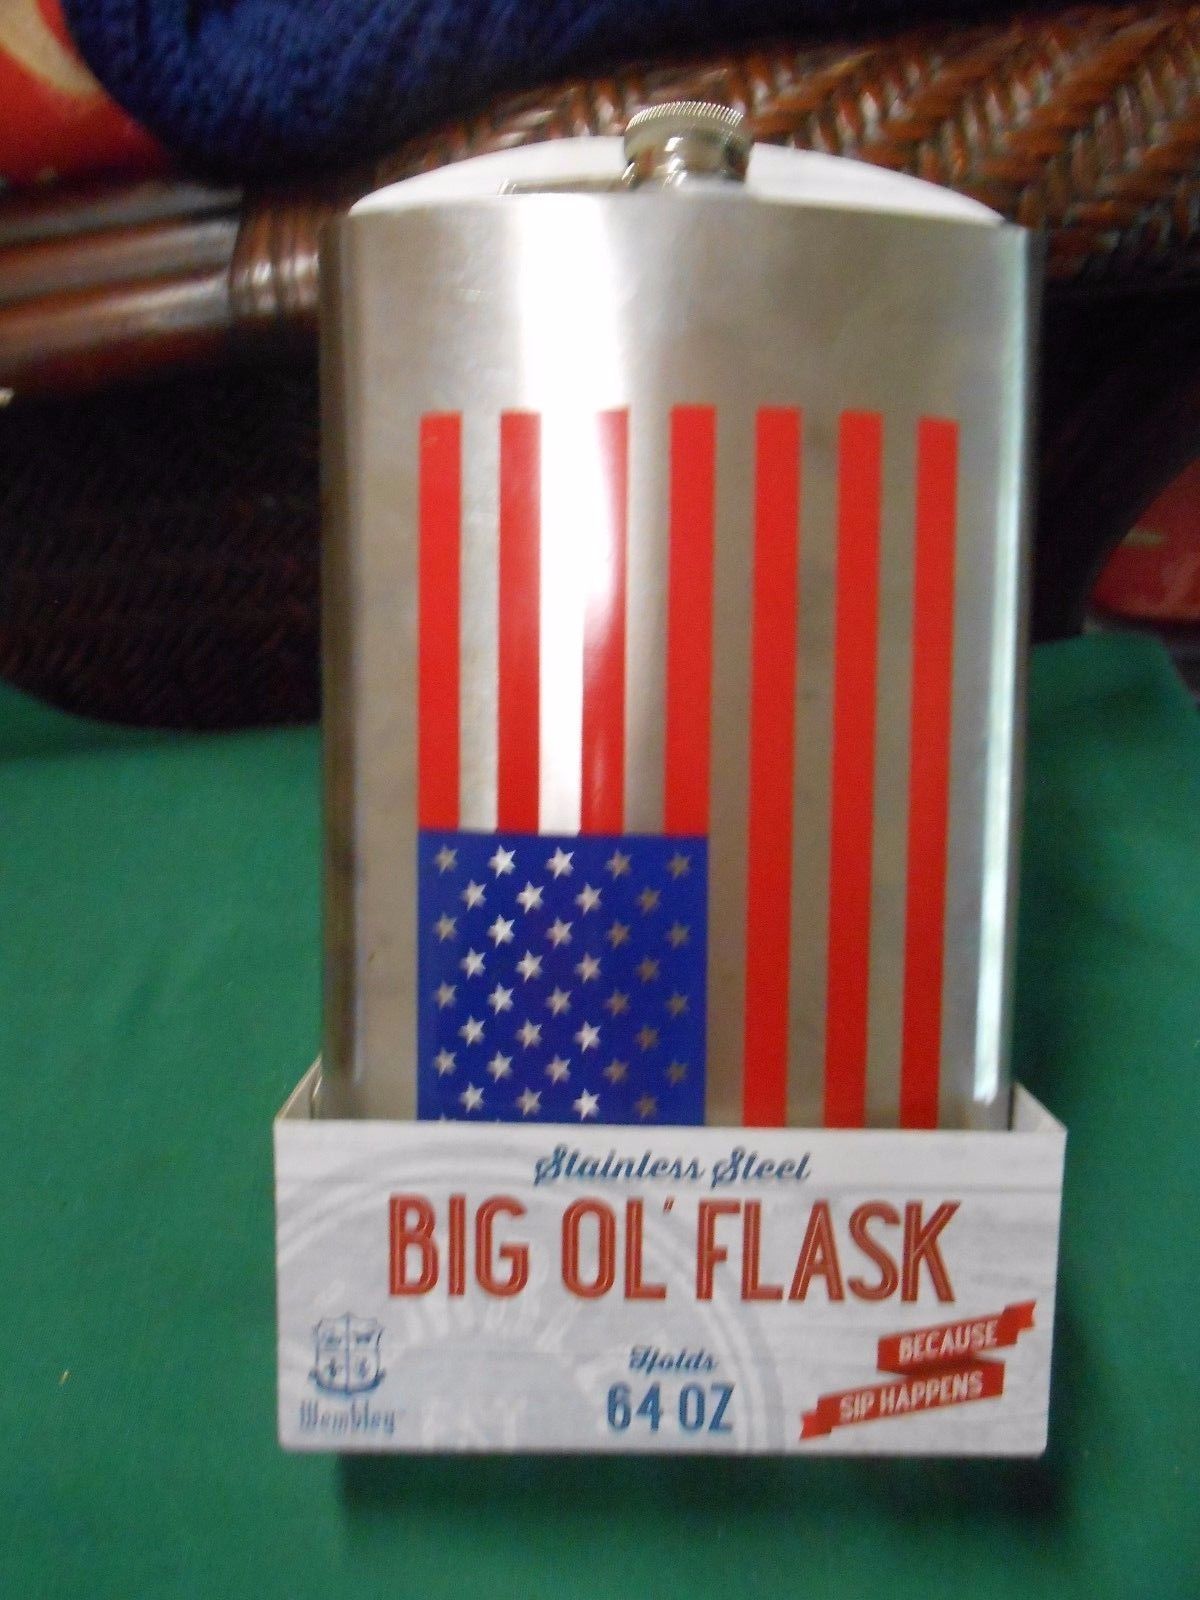 Primary image for NEW...Stainless Steel BIG OL FLASK "Because Sip Happens".......-FREE POSTAGE USA